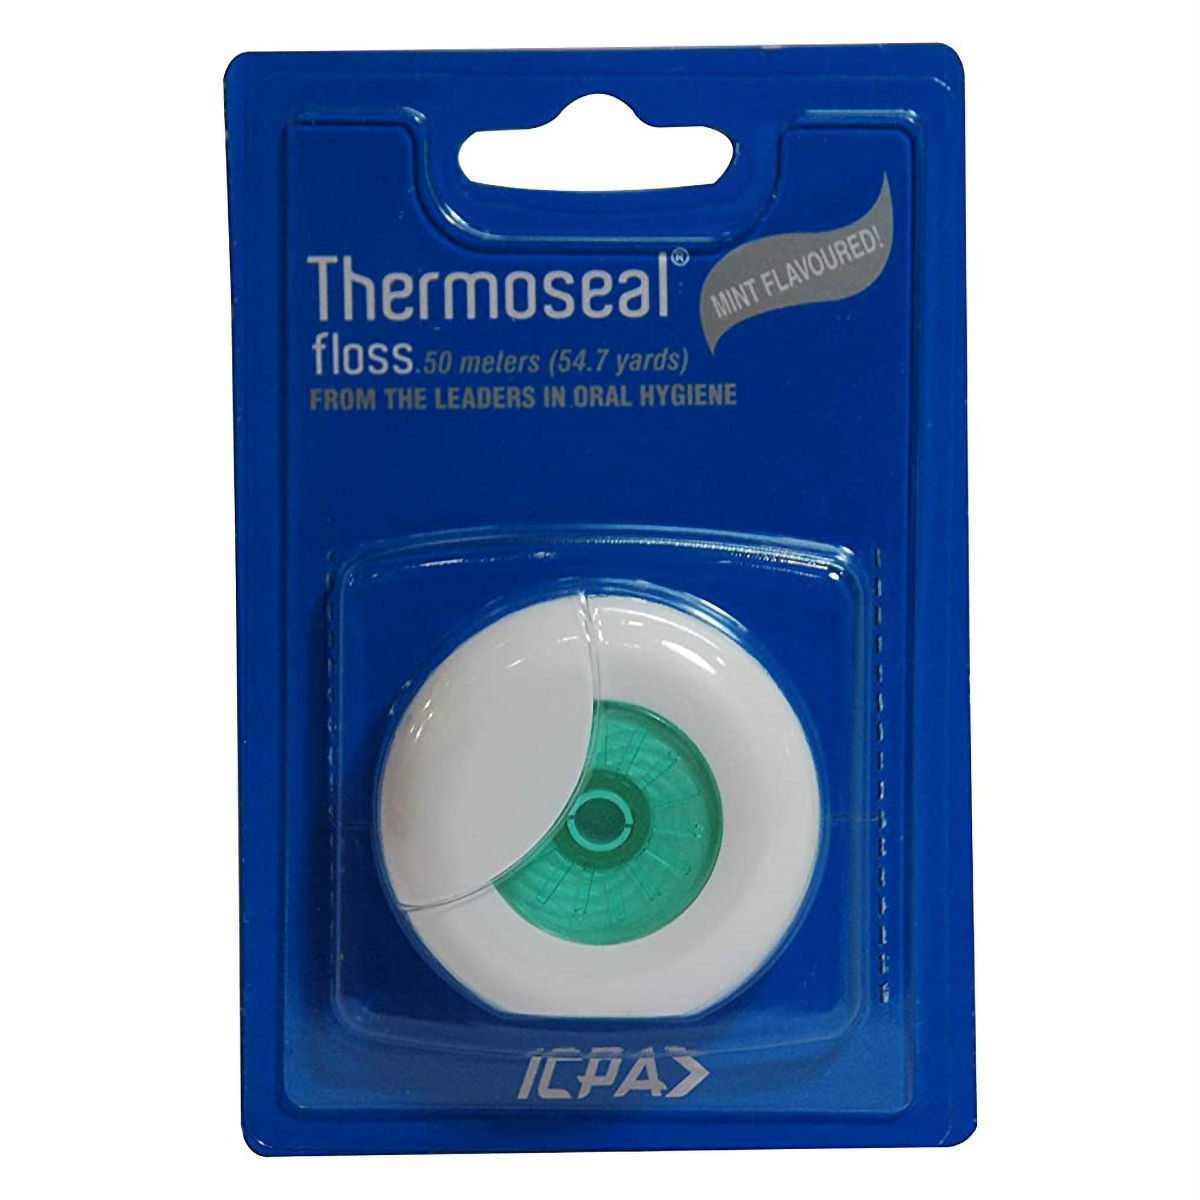 Buy Thermoseal Floss, 1 Count Online